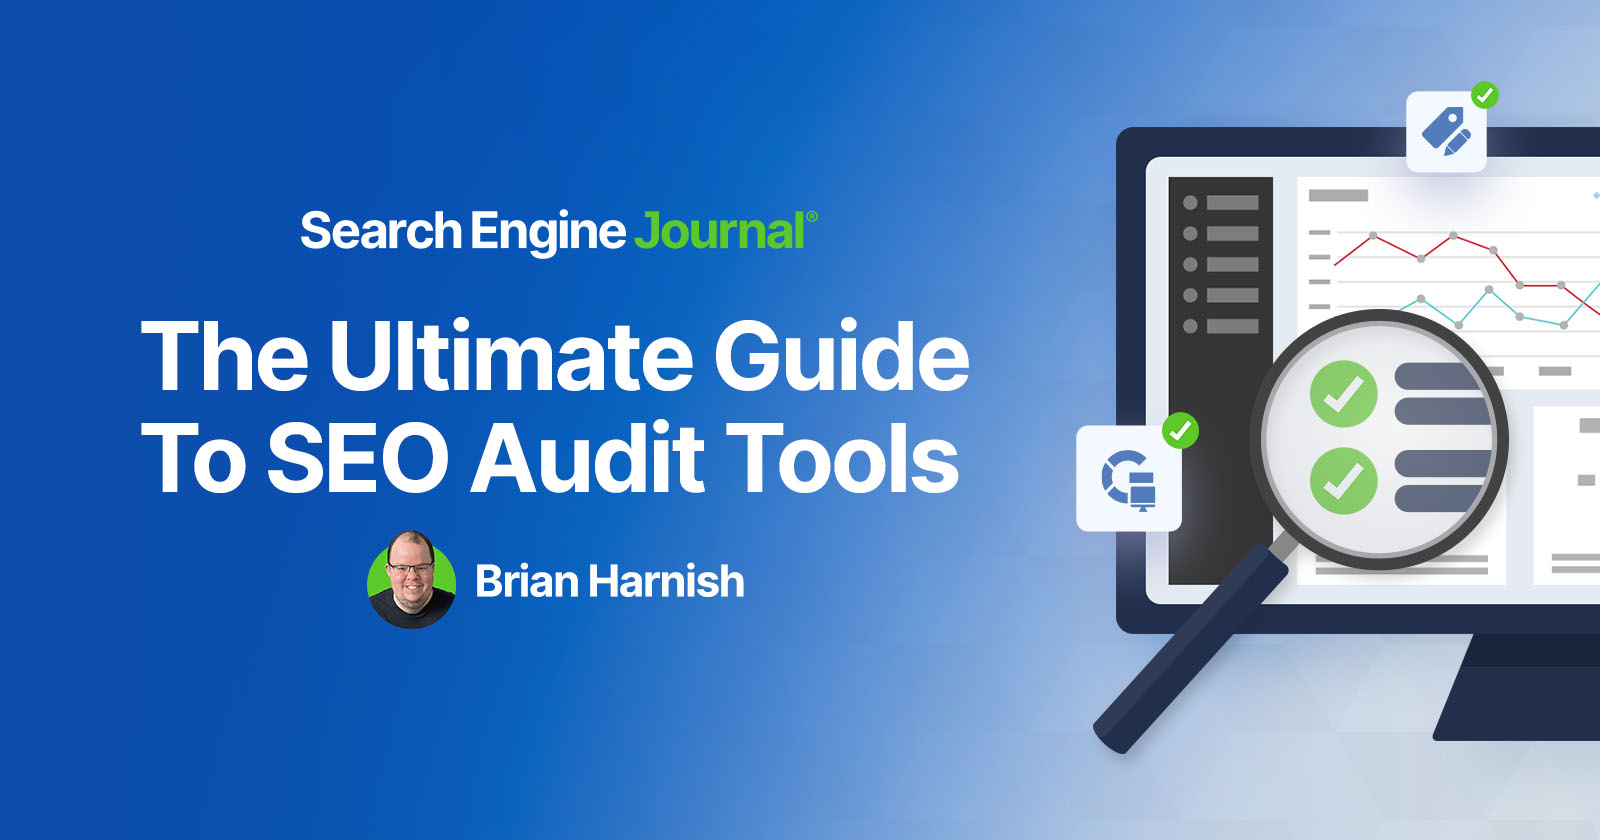 The Ultimate Guide To SEO Audit Tools